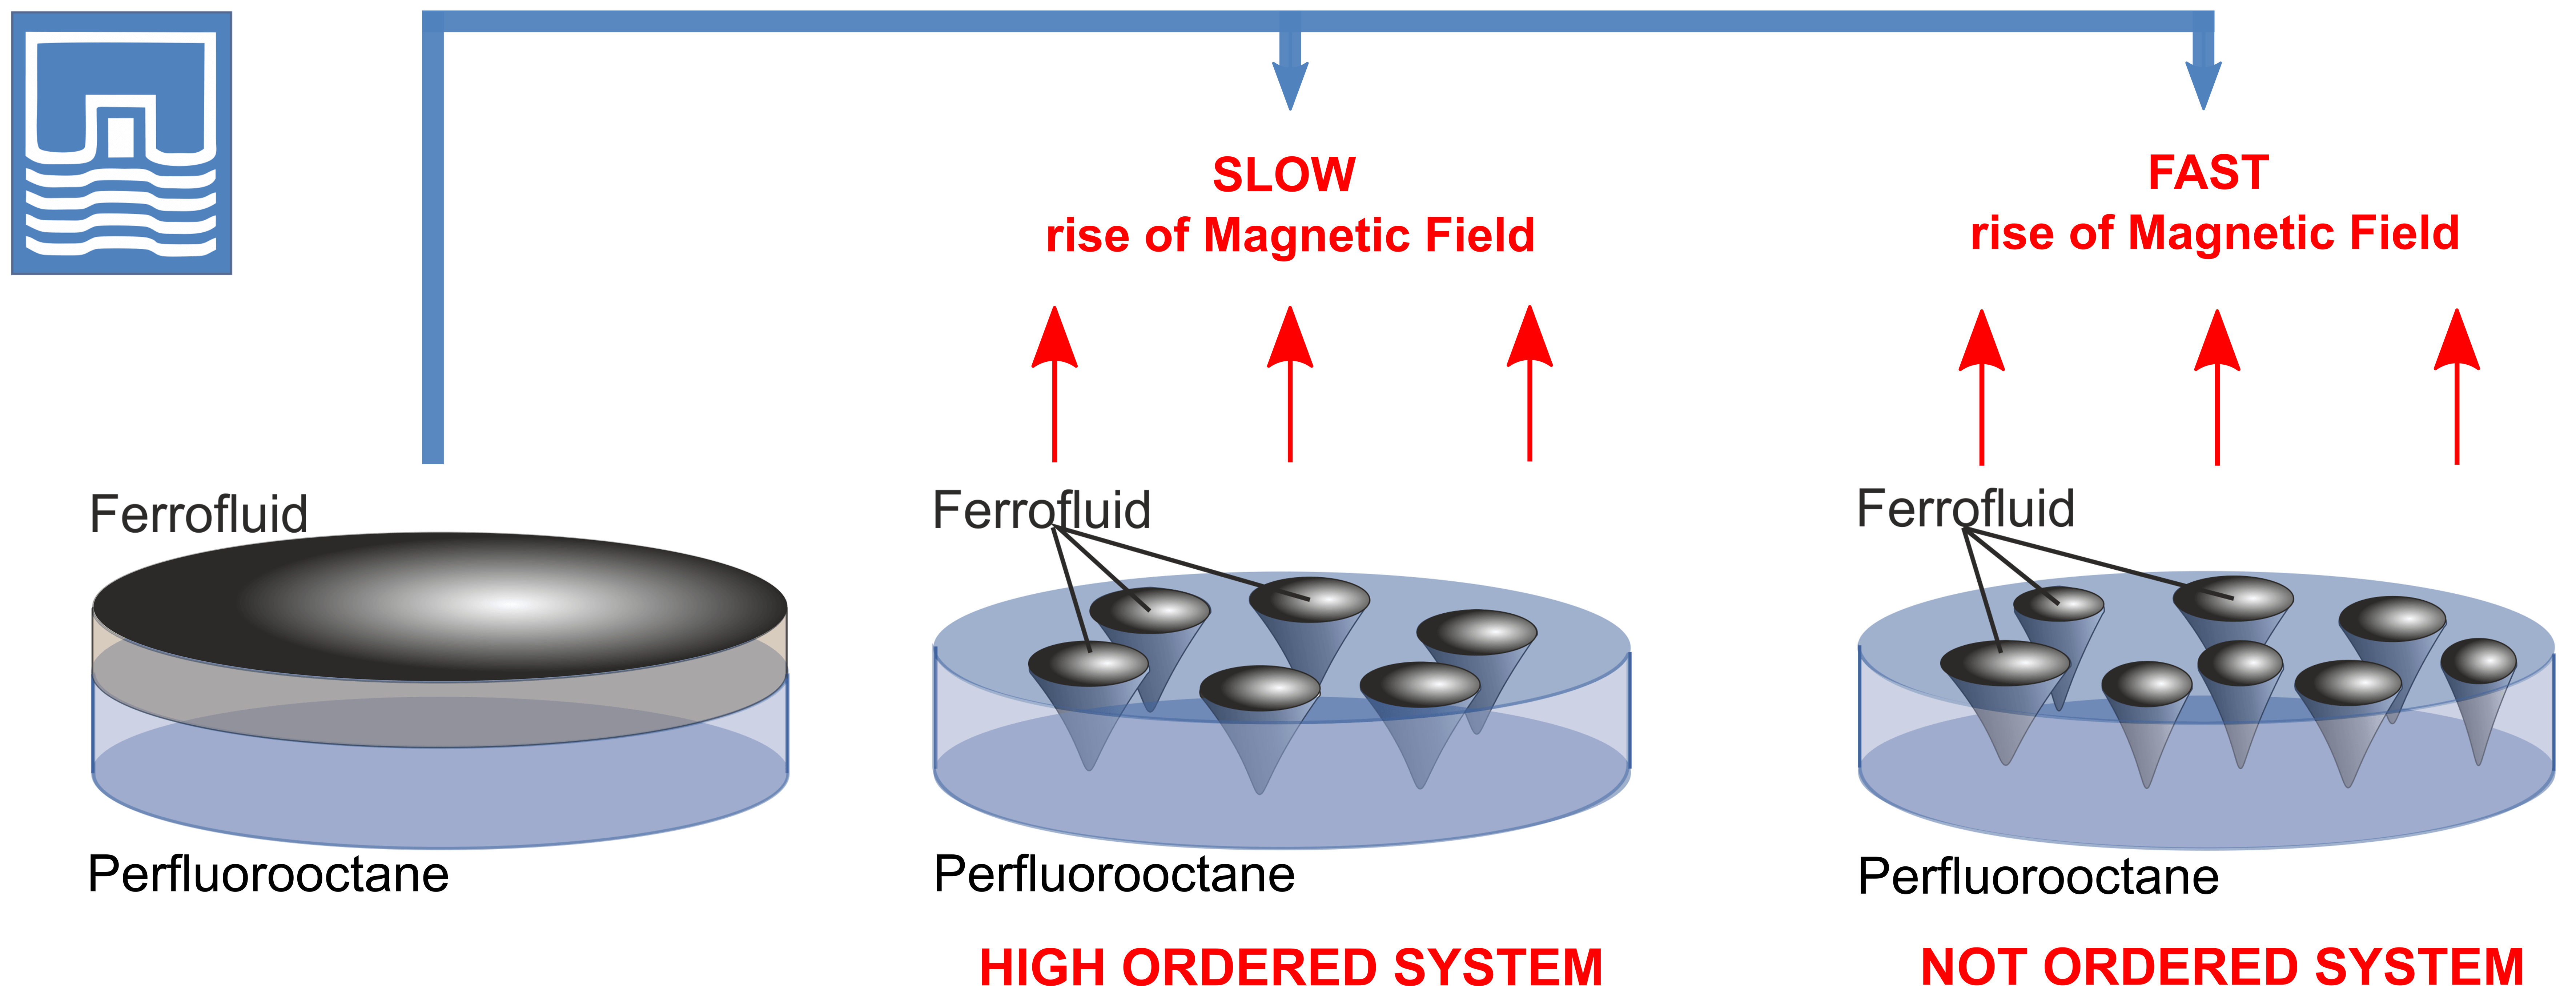 The Disintegration of a Floating Ferrofluid Layer into an Ordered Drop System in a Vertical Magnetic Field